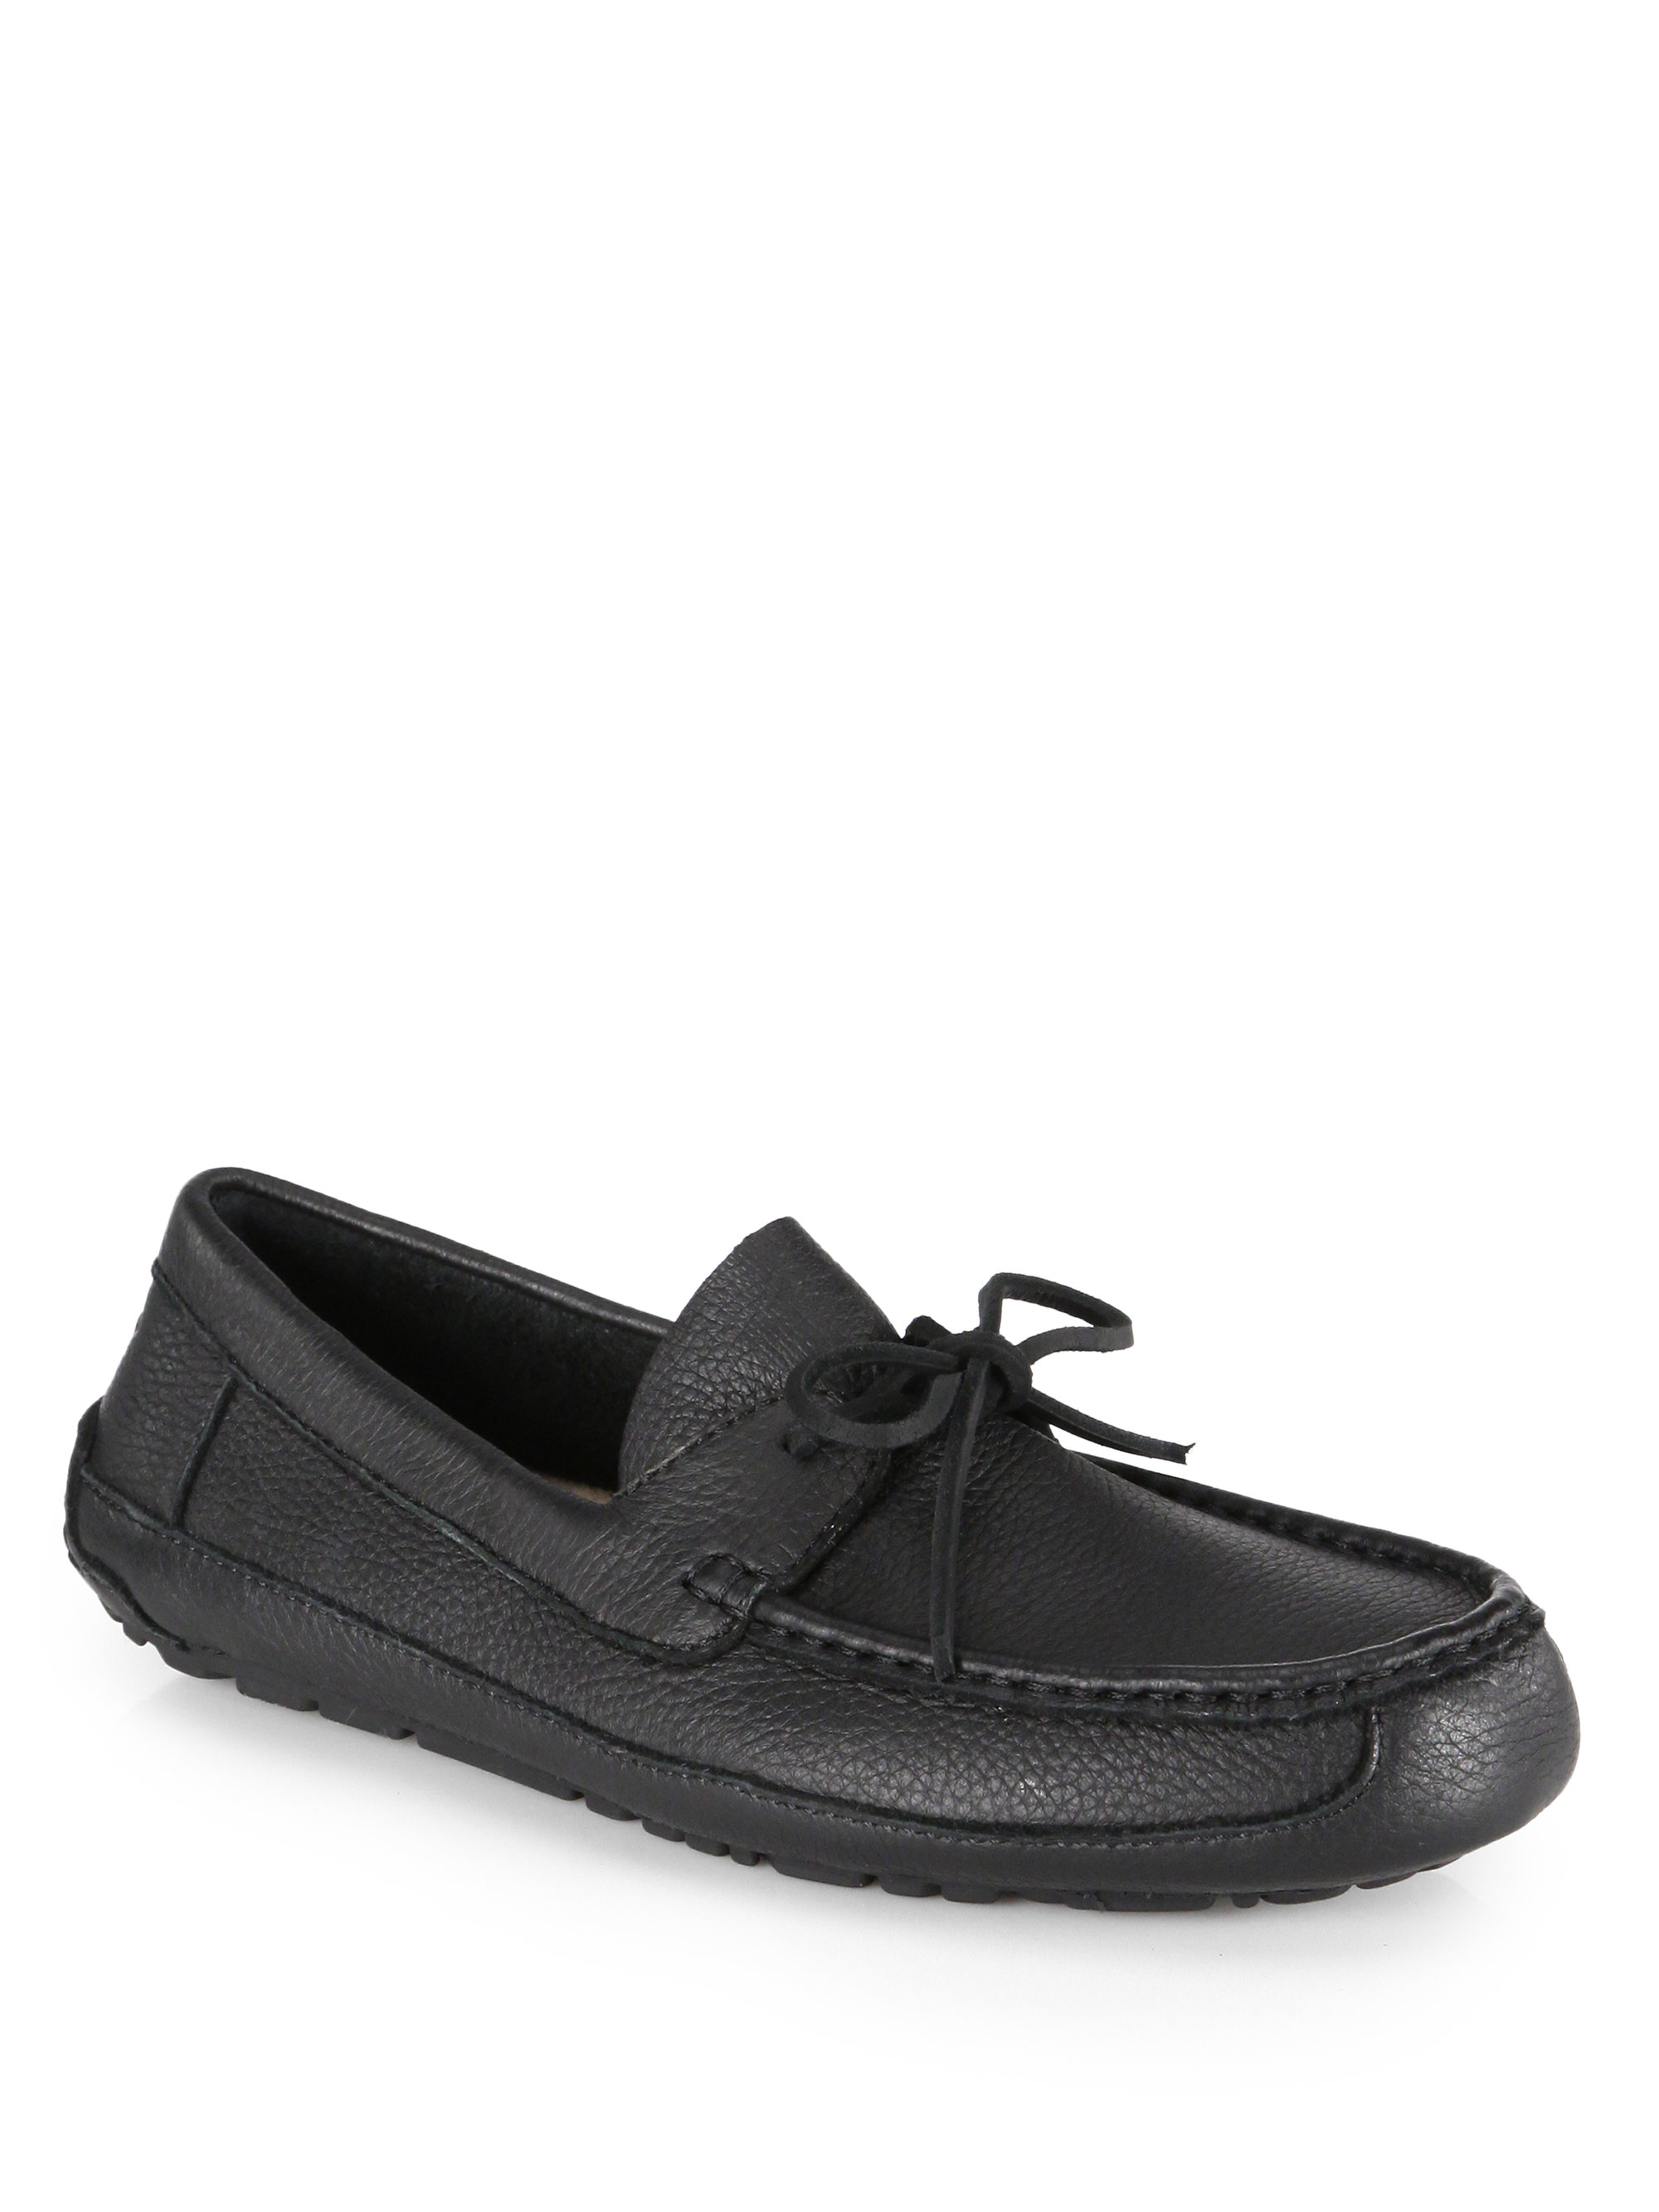 Lyst - Ugg Marlowe Leather Slip-on Drivers in Black for Men